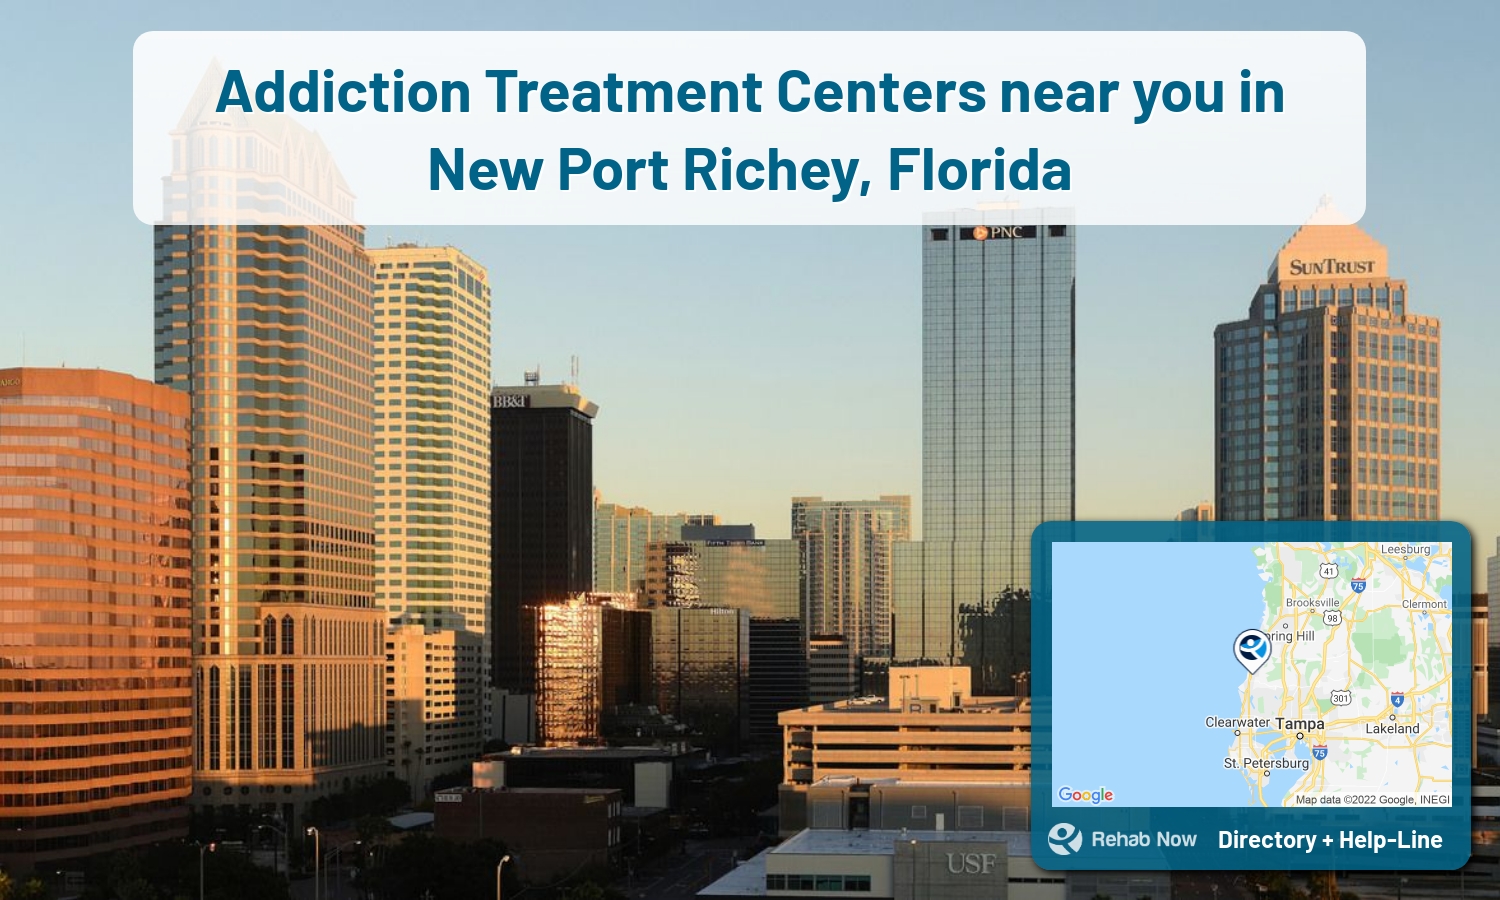 New Port Richey, FL Treatment Centers. Find drug rehab in New Port Richey, Florida, or detox and treatment programs. Get the right help now!